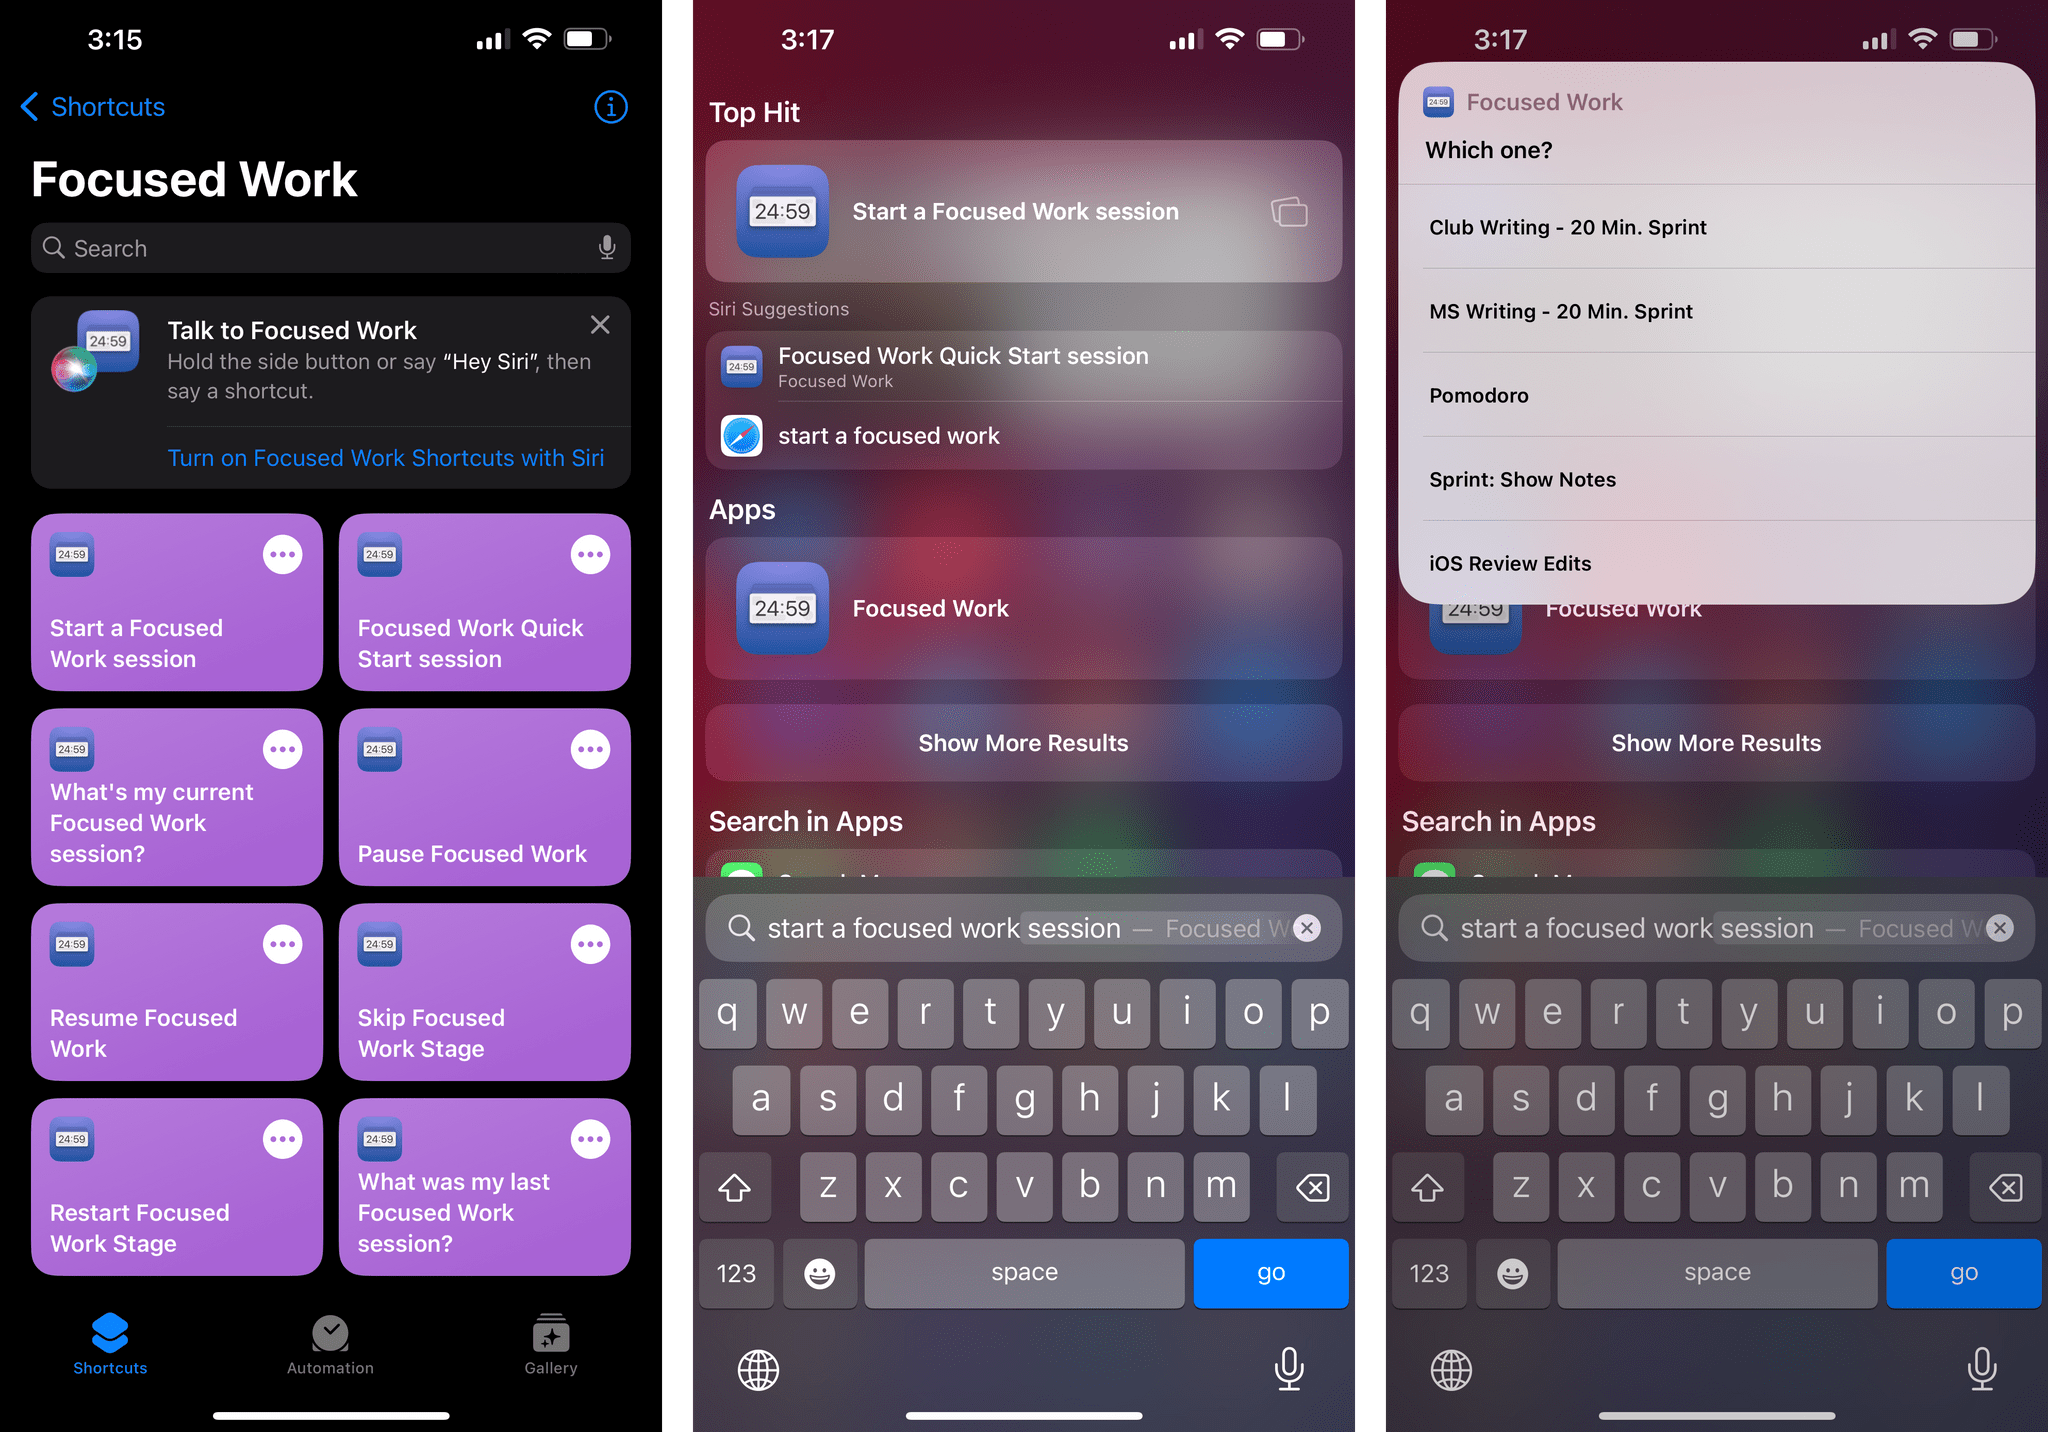 App Shortcuts for Focused Work can also be used from Siri and Spotlight in addition to the Shortcuts app.